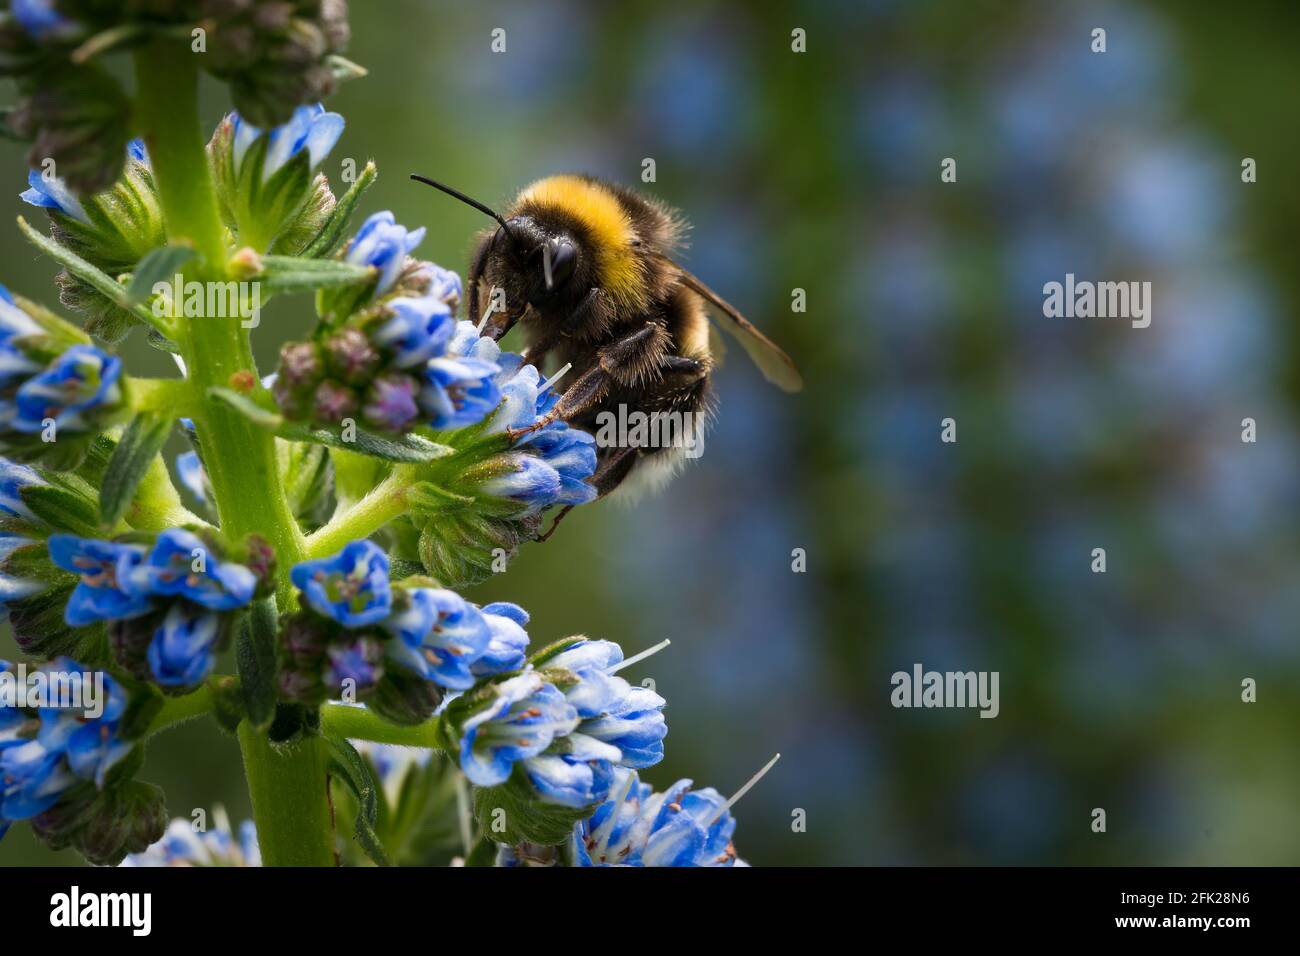 Close-up image of a bumblebee on a blue flower Echium candicans Fastuosum Stock Photo